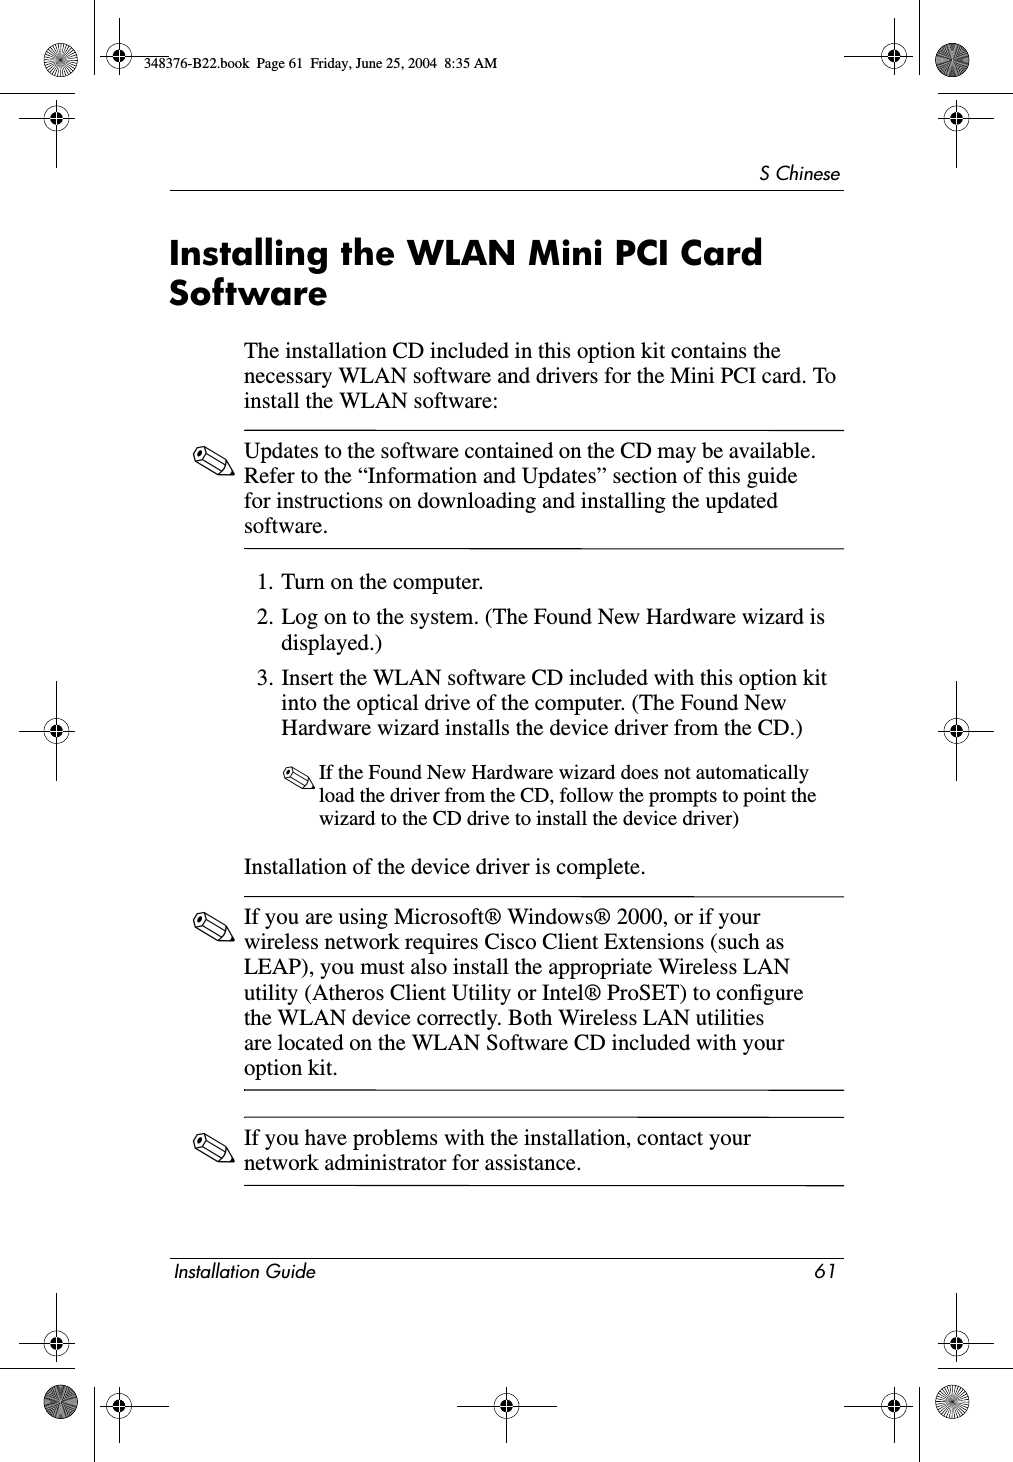 S ChineseInstallation Guide 61Installing the WLAN Mini PCI Card SoftwareThe installation CD included in this option kit contains the necessary WLAN software and drivers for the Mini PCI card. To install the WLAN software: ✎Updates to the software contained on the CD may be available. Refer to the “Information and Updates” section of this guide for instructions on downloading and installing the updated software.1. Turn on the computer.2. Log on to the system. (The Found New Hardware wizard is displayed.)3. Insert the WLAN software CD included with this option kit into the optical drive of the computer. (The Found New Hardware wizard installs the device driver from the CD.)✎If the Found New Hardware wizard does not automatically load the driver from the CD, follow the prompts to point the wizard to the CD drive to install the device driver)Installation of the device driver is complete.✎If you are using Microsoft® Windows® 2000, or if your wireless network requires Cisco Client Extensions (such as LEAP), you must also install the appropriate Wireless LAN utility (Atheros Client Utility or Intel® ProSET) to configure the WLAN device correctly. Both Wireless LAN utilities are located on the WLAN Software CD included with your option kit. ✎If you have problems with the installation, contact your network administrator for assistance.348376-B22.book  Page 61  Friday, June 25, 2004  8:35 AM